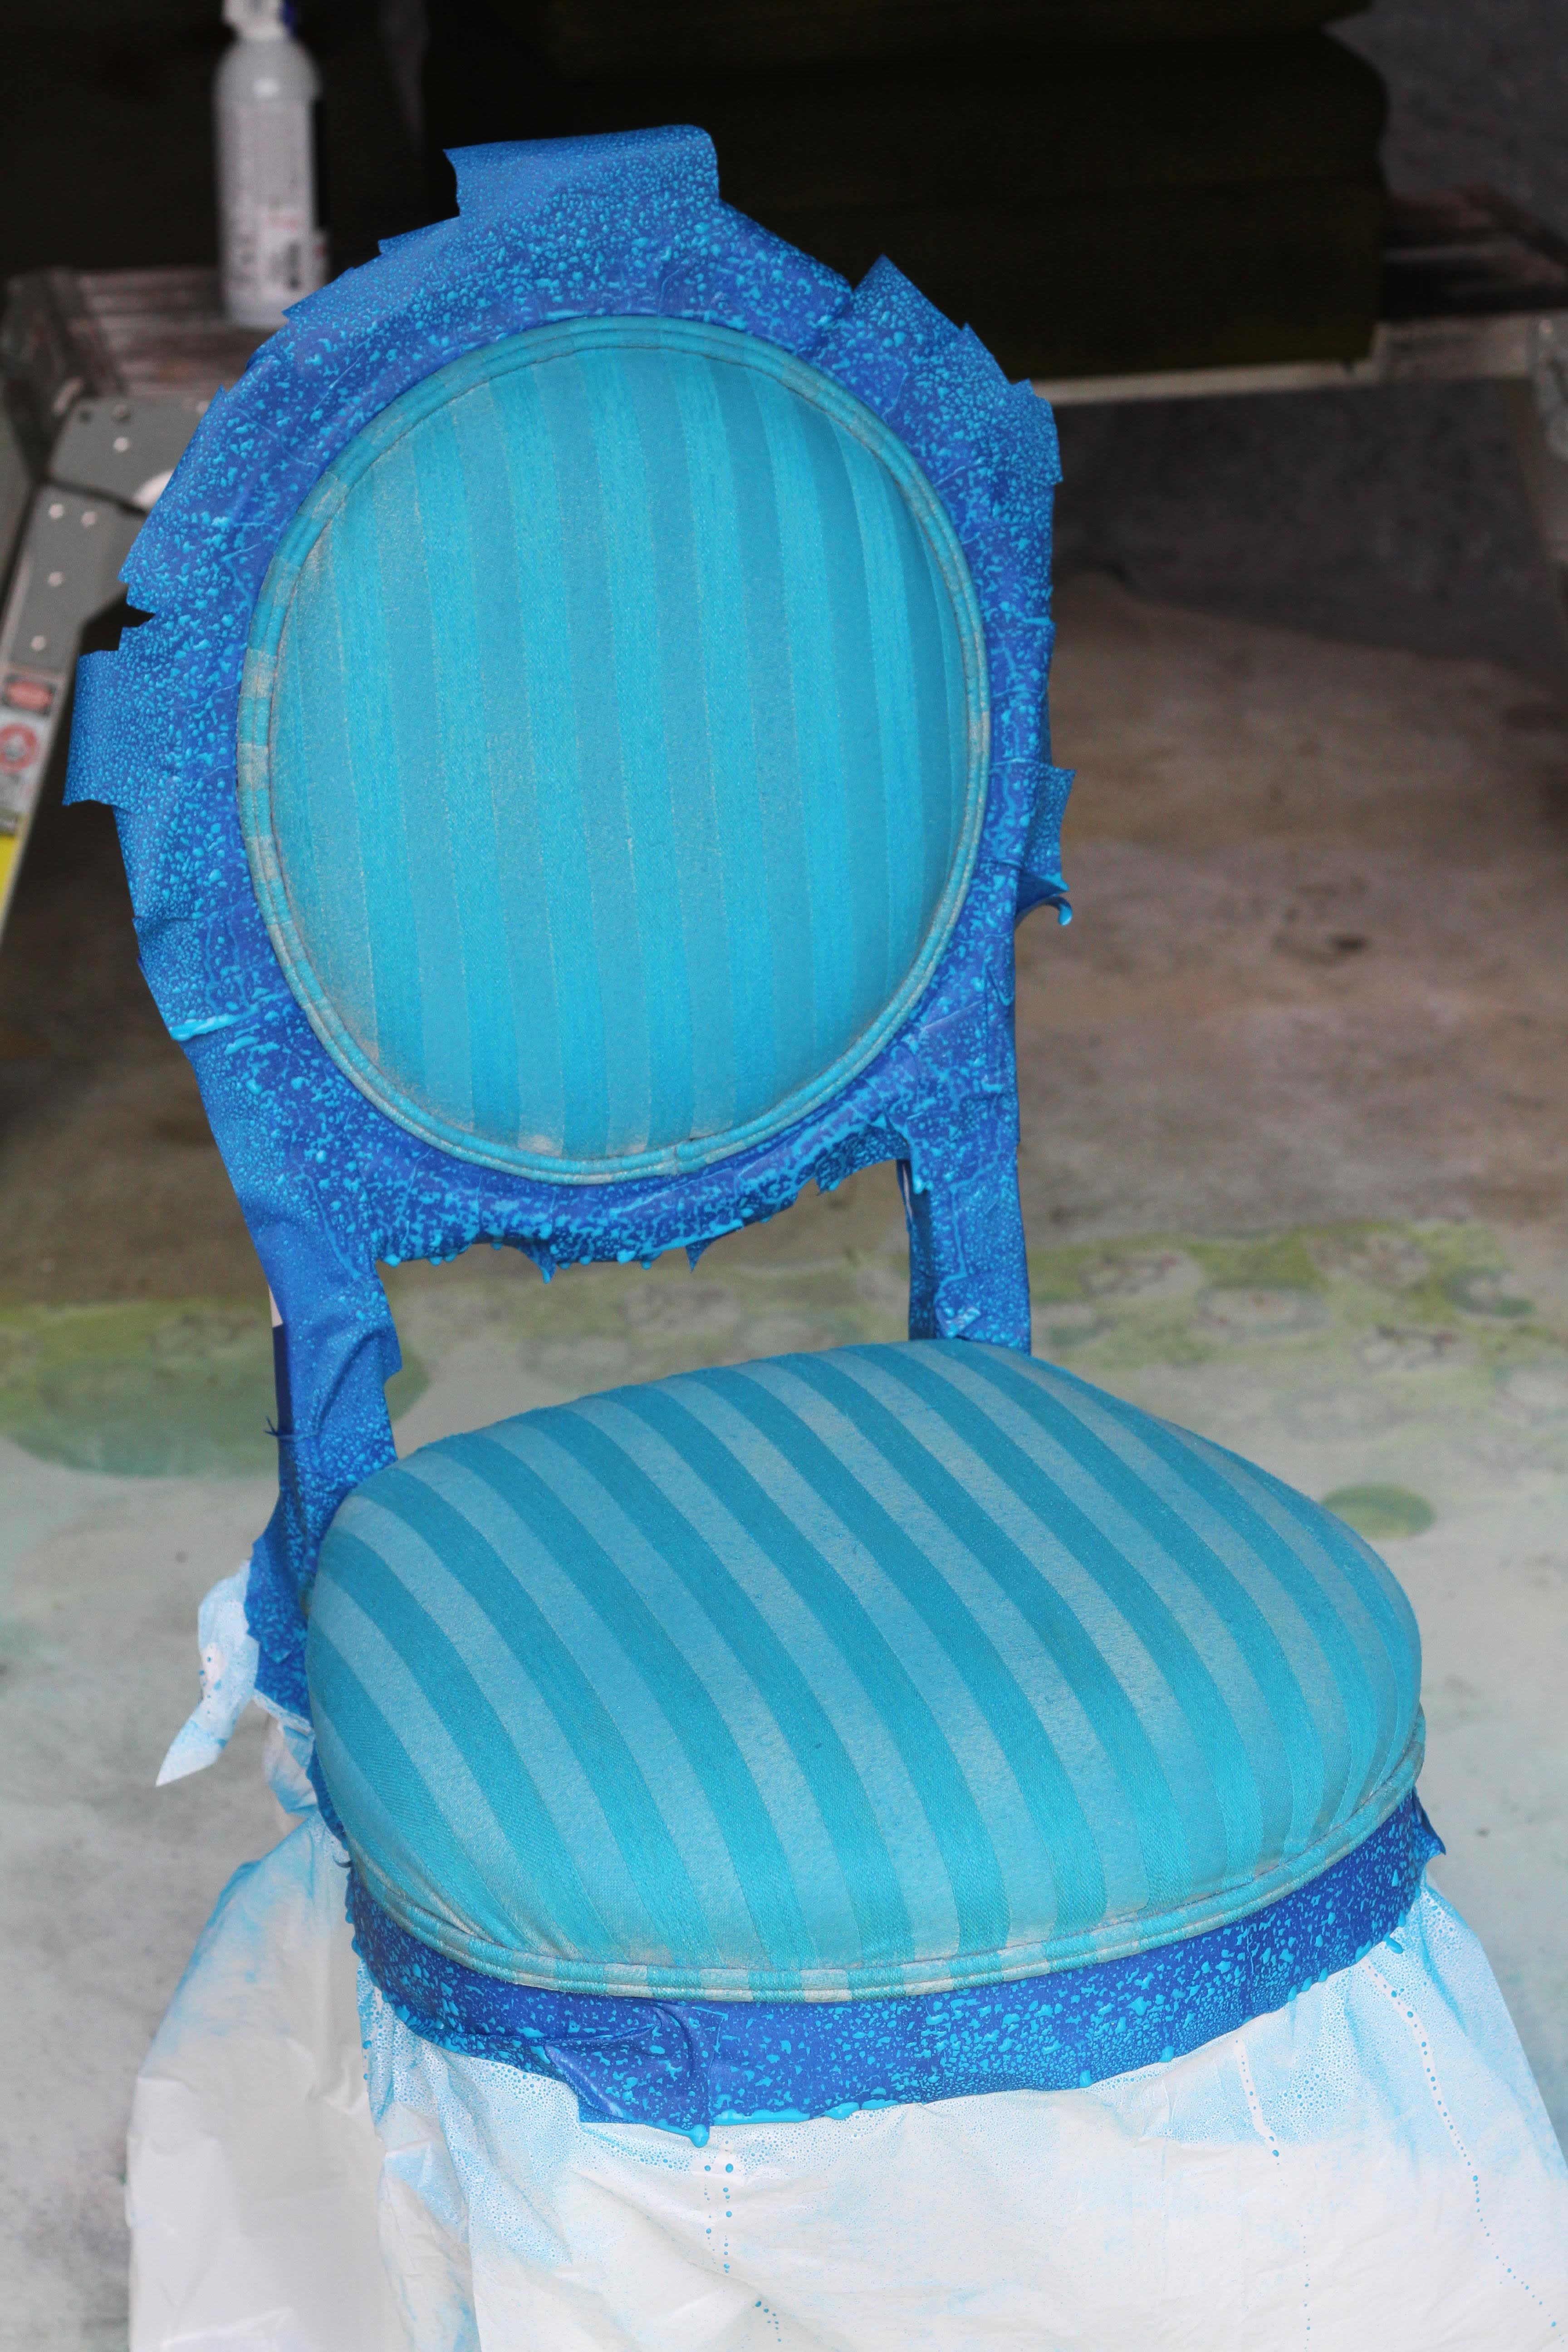 How I Painted a Chair Blue with Upholstery Paint » Dollar Store Crafts